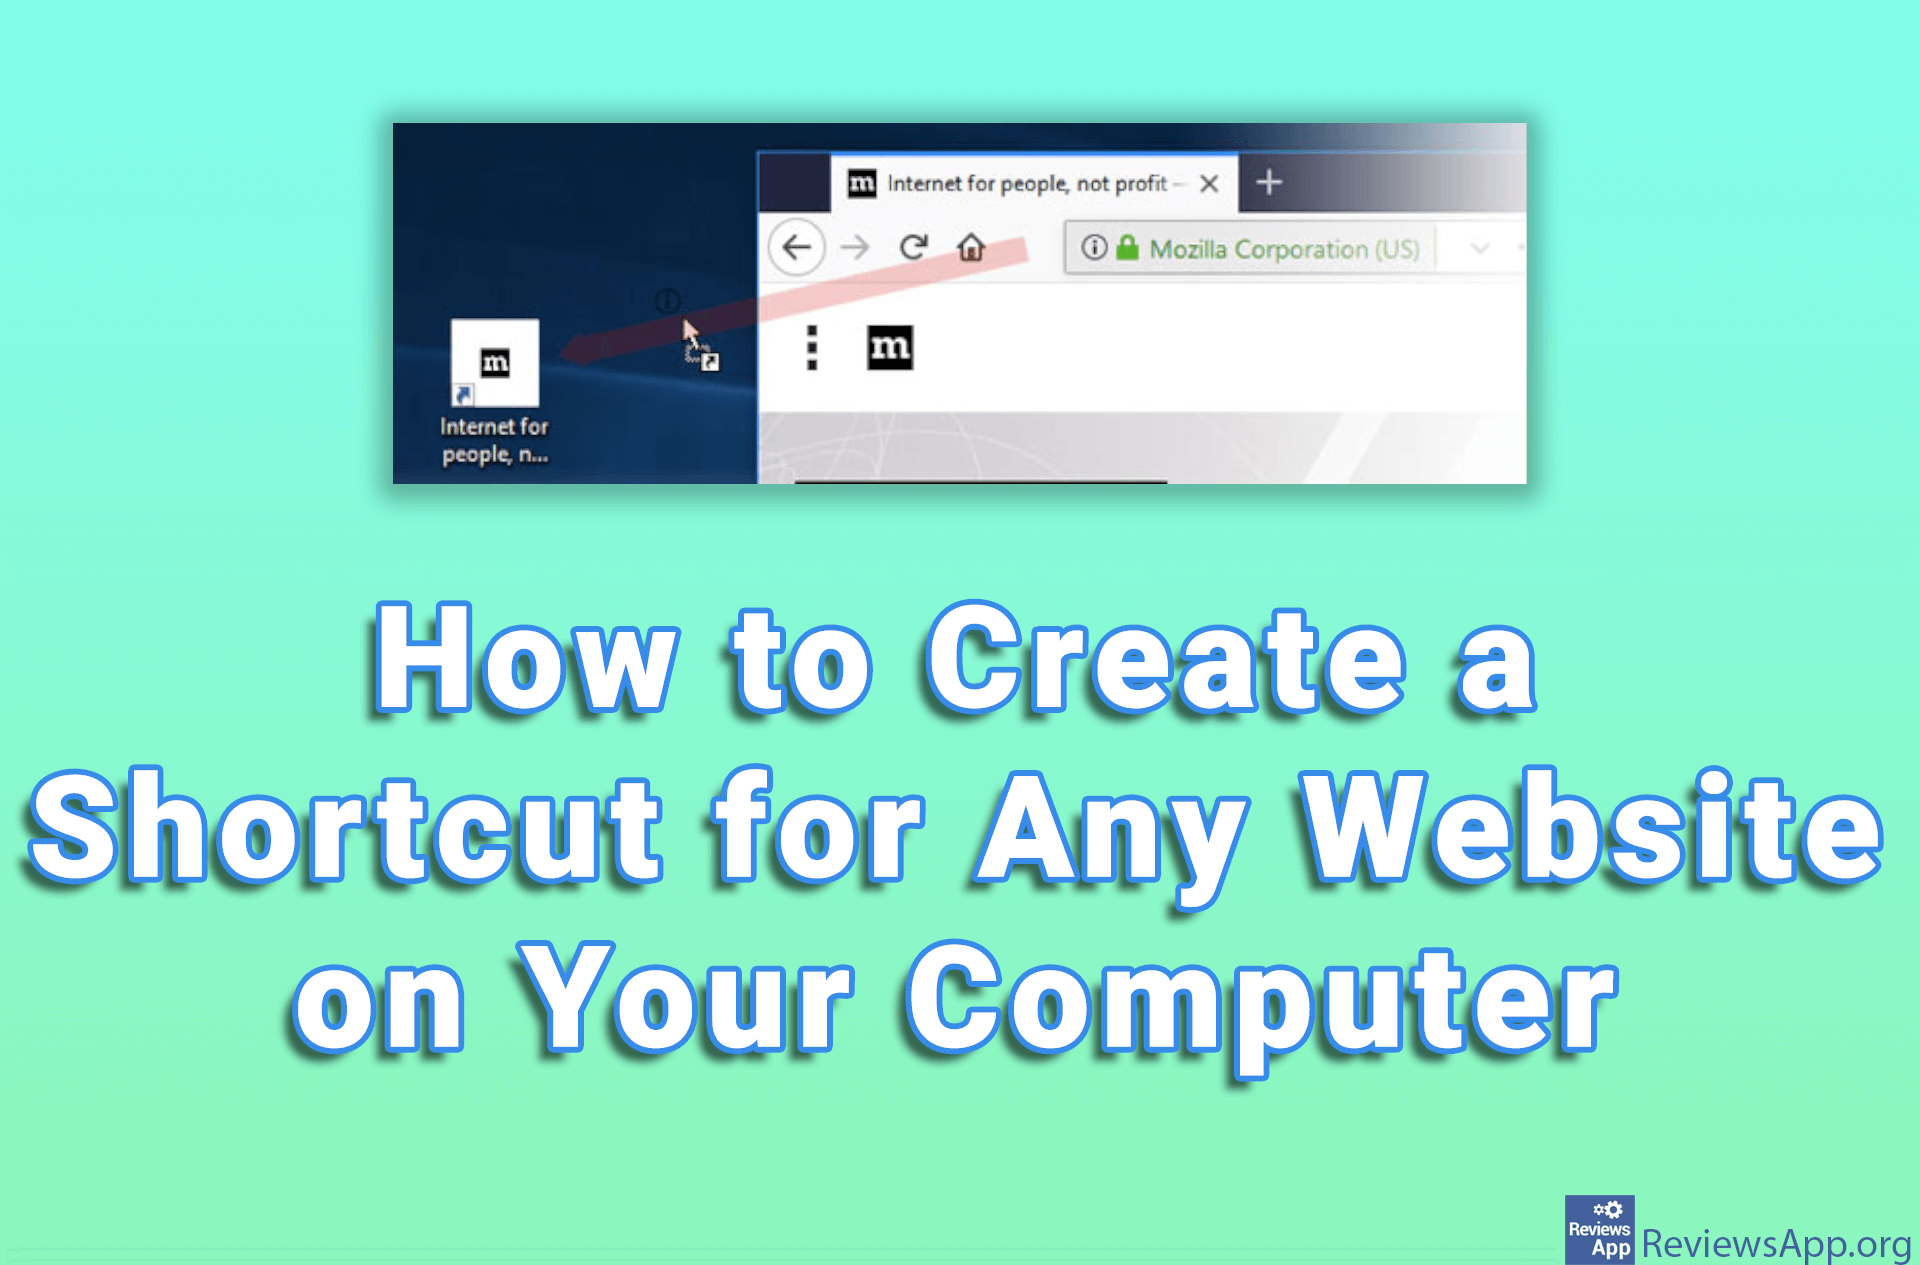 How to Create a Shortcut for Any Website on Your Computer